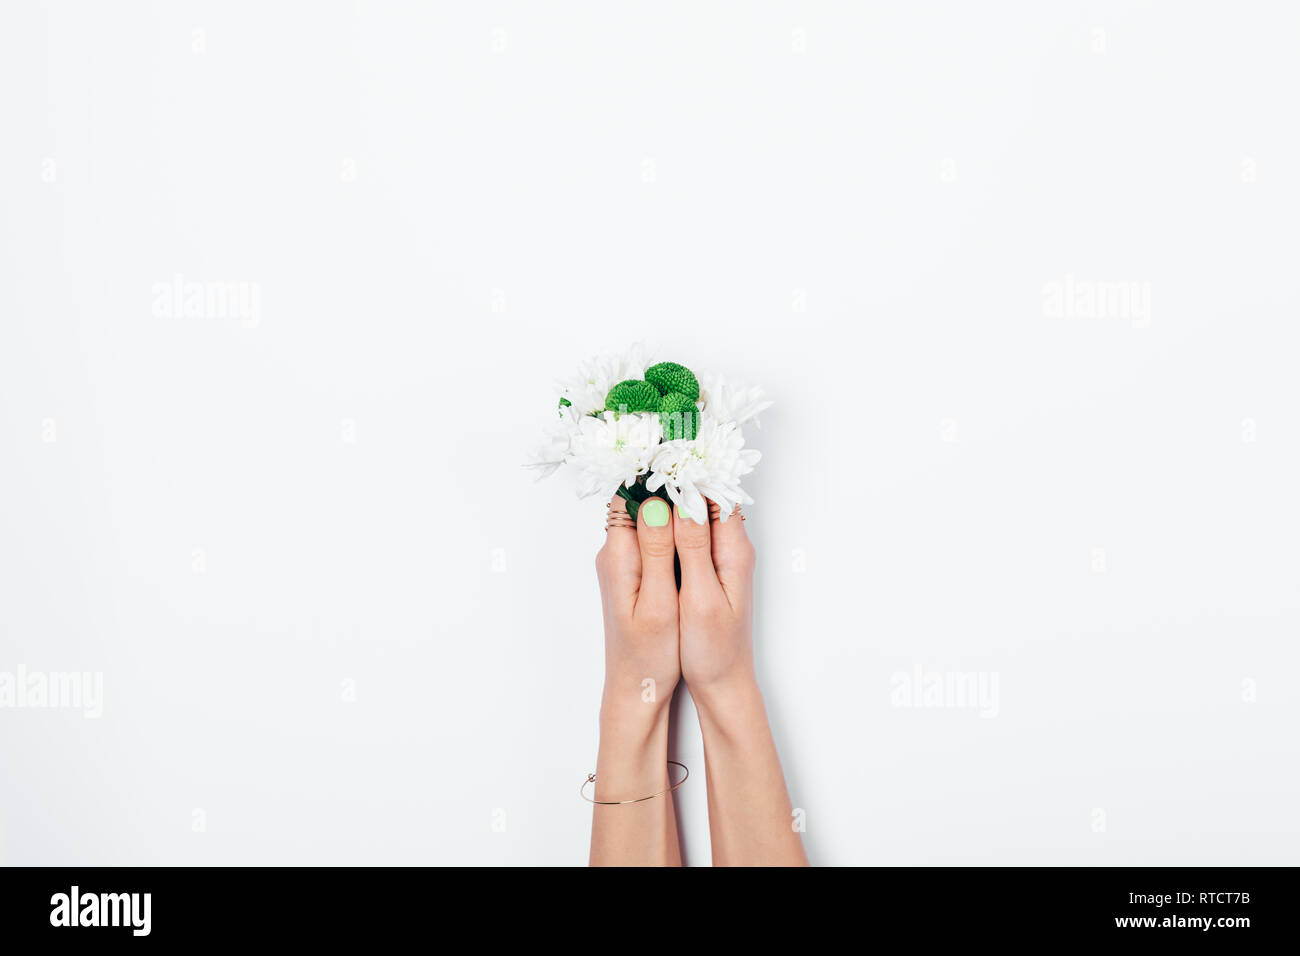 Small bouquet in female's hands with green manicure on white background. Woman holding fresh flowers. Stock Photo